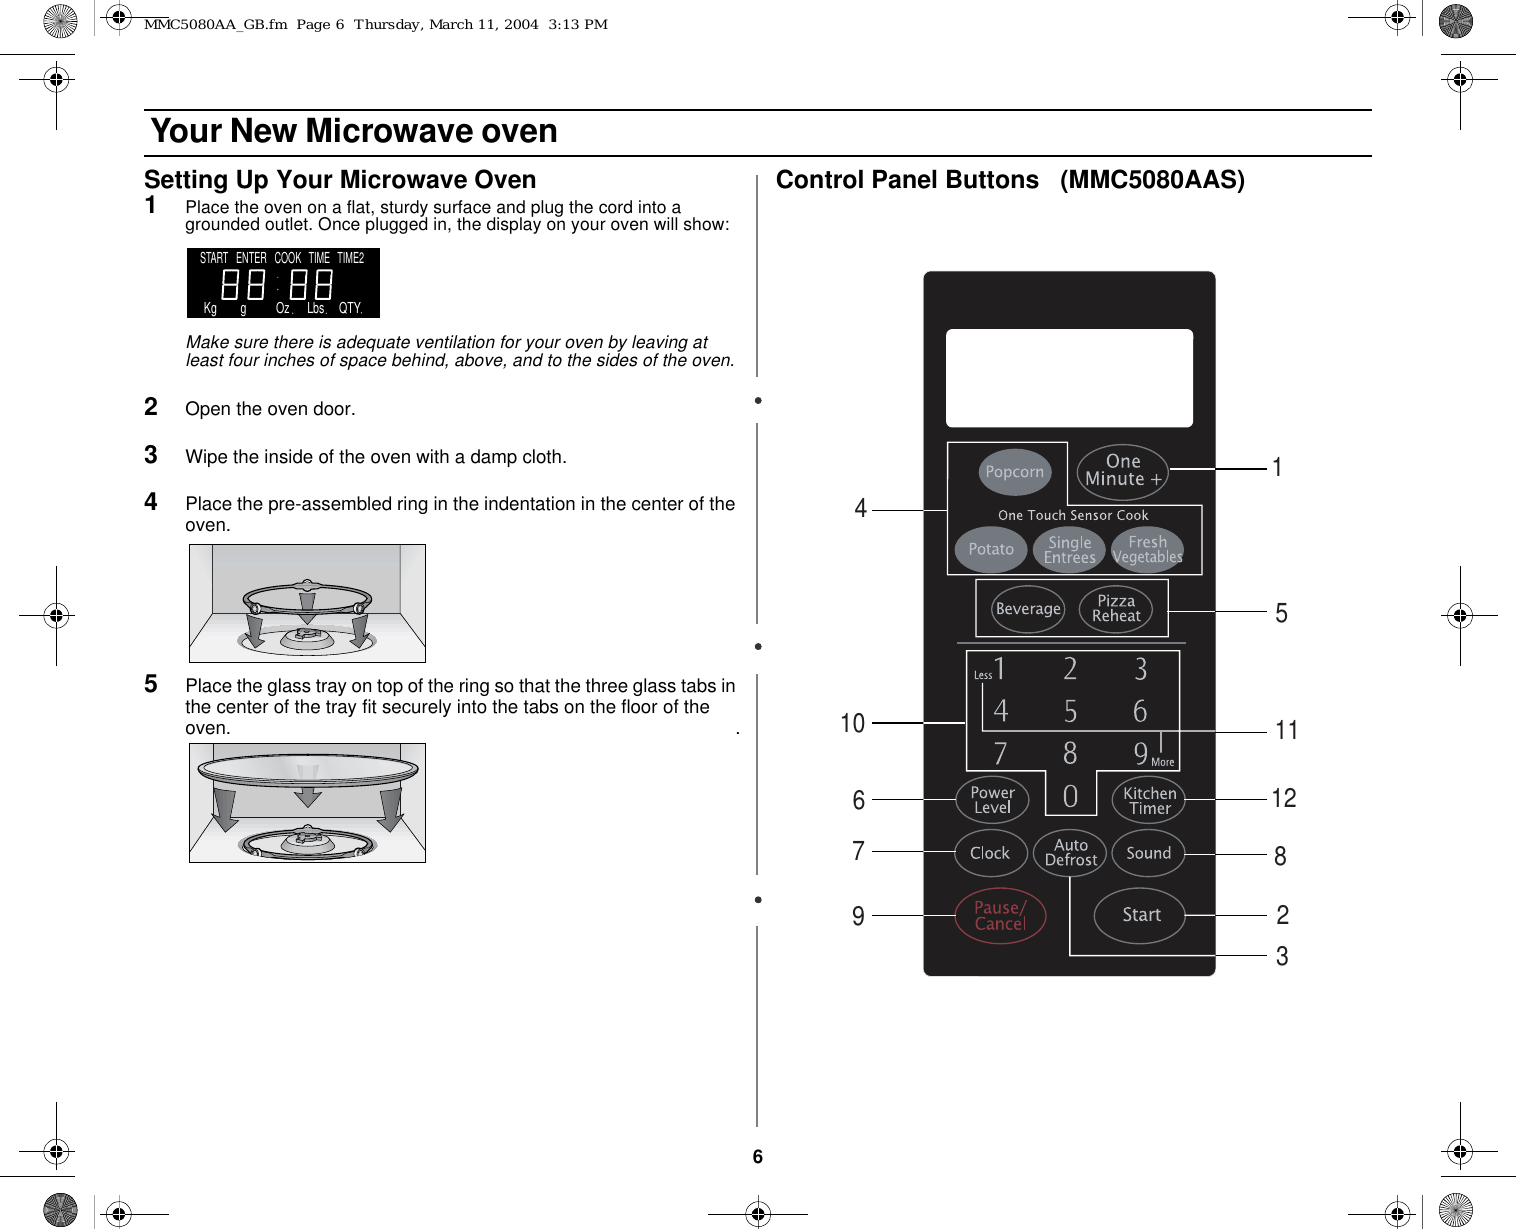 6 Your New Microwave ovenSetting Up Your Microwave Oven1Place the oven on a flat, sturdy surface and plug the cord into a grounded outlet. Once plugged in, the display on your oven will show:Make sure there is adequate ventilation for your oven by leaving at least four inches of space behind, above, and to the sides of the oven. 2Open the oven door.3Wipe the inside of the oven with a damp cloth.4Place the pre-assembled ring in the indentation in the center of the oven.                                                                                                   5Place the glass tray on top of the ring so that the three glass tabs in the center of the tray fit securely into the tabs on the floor of the oven.                                                                                                    .Control Panel Buttons   (MMC5080AAS)START   ENTER   COOK   TIME   TIME2    Kg        g          Oz      Lbs     QTY132467911121058MMC5080AA_GB.fm  Page 6  Thursday, March 11, 2004  3:13 PM